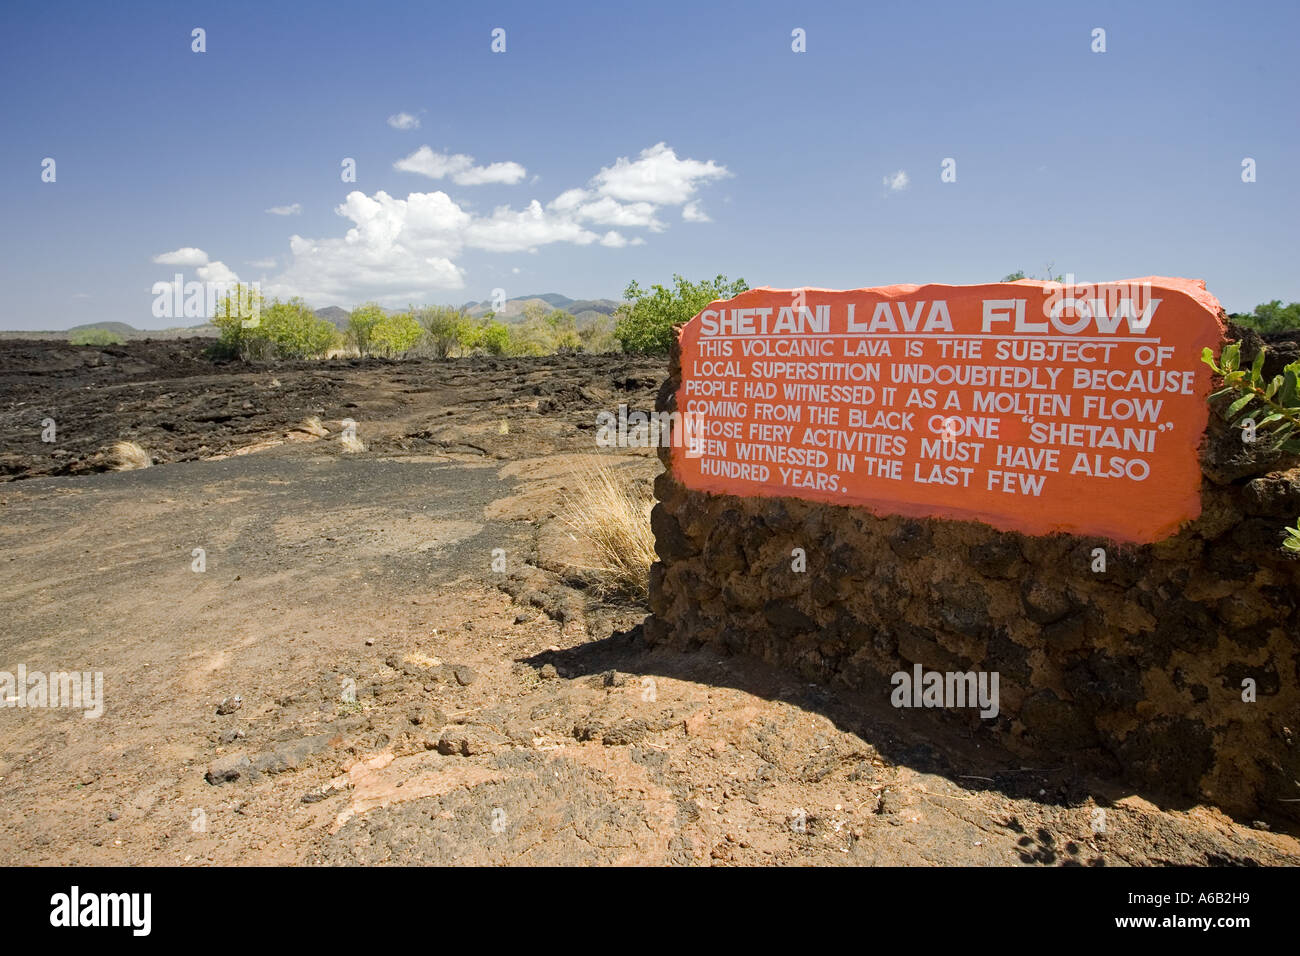 Information sign Shitani lava flow with volcanic cones of Chyulu Hills Tsavo National Park West Kenya East Africa Stock Photo